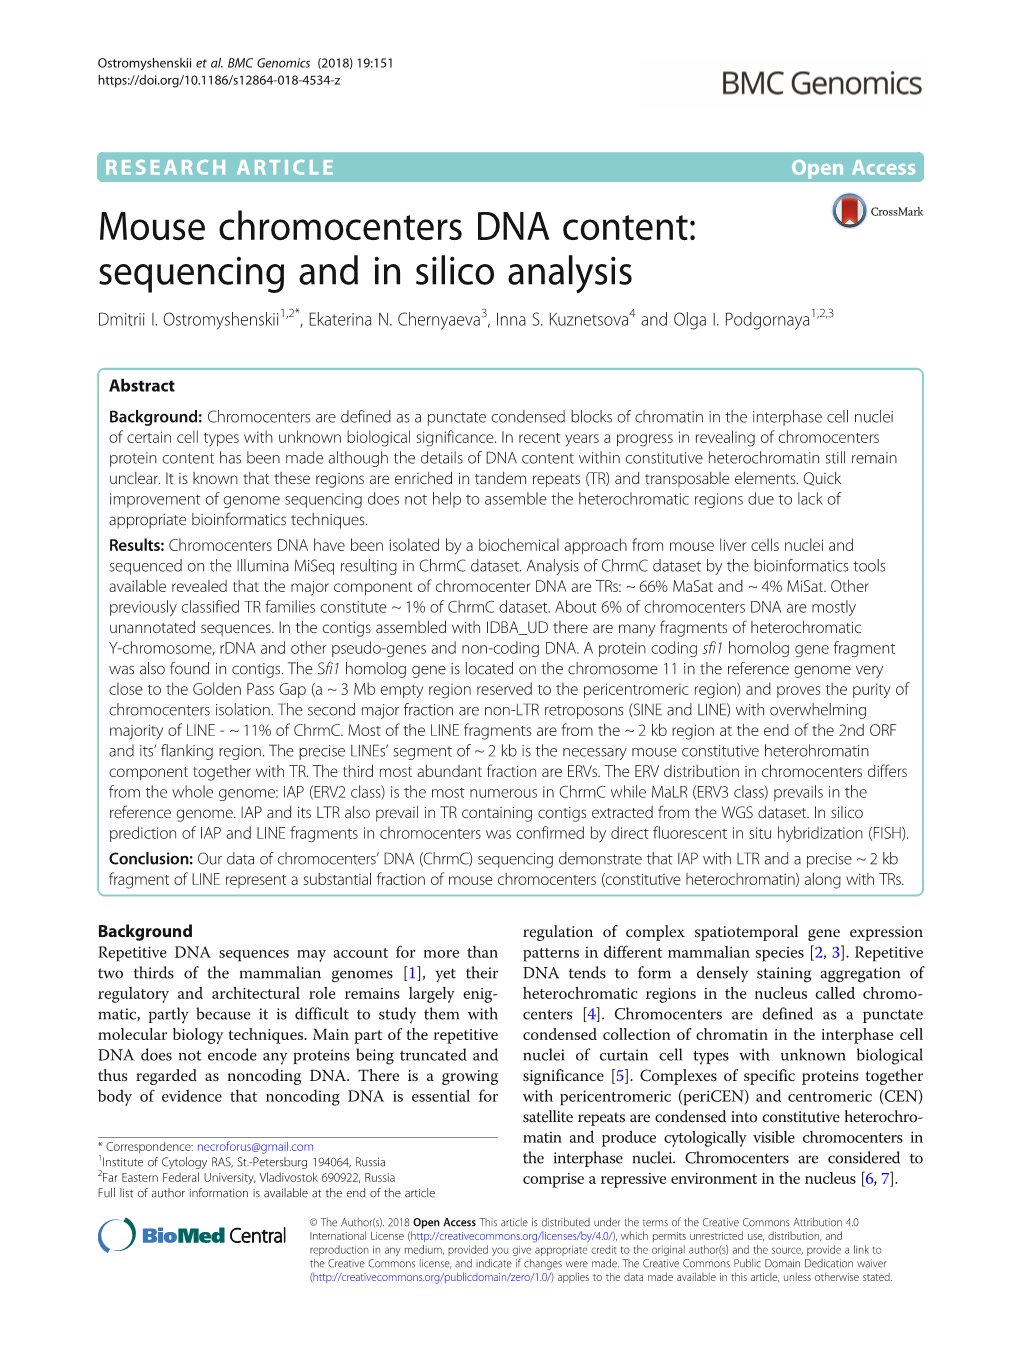 Mouse Chromocenters DNA Content: Sequencing and in Silico Analysis Dmitrii I